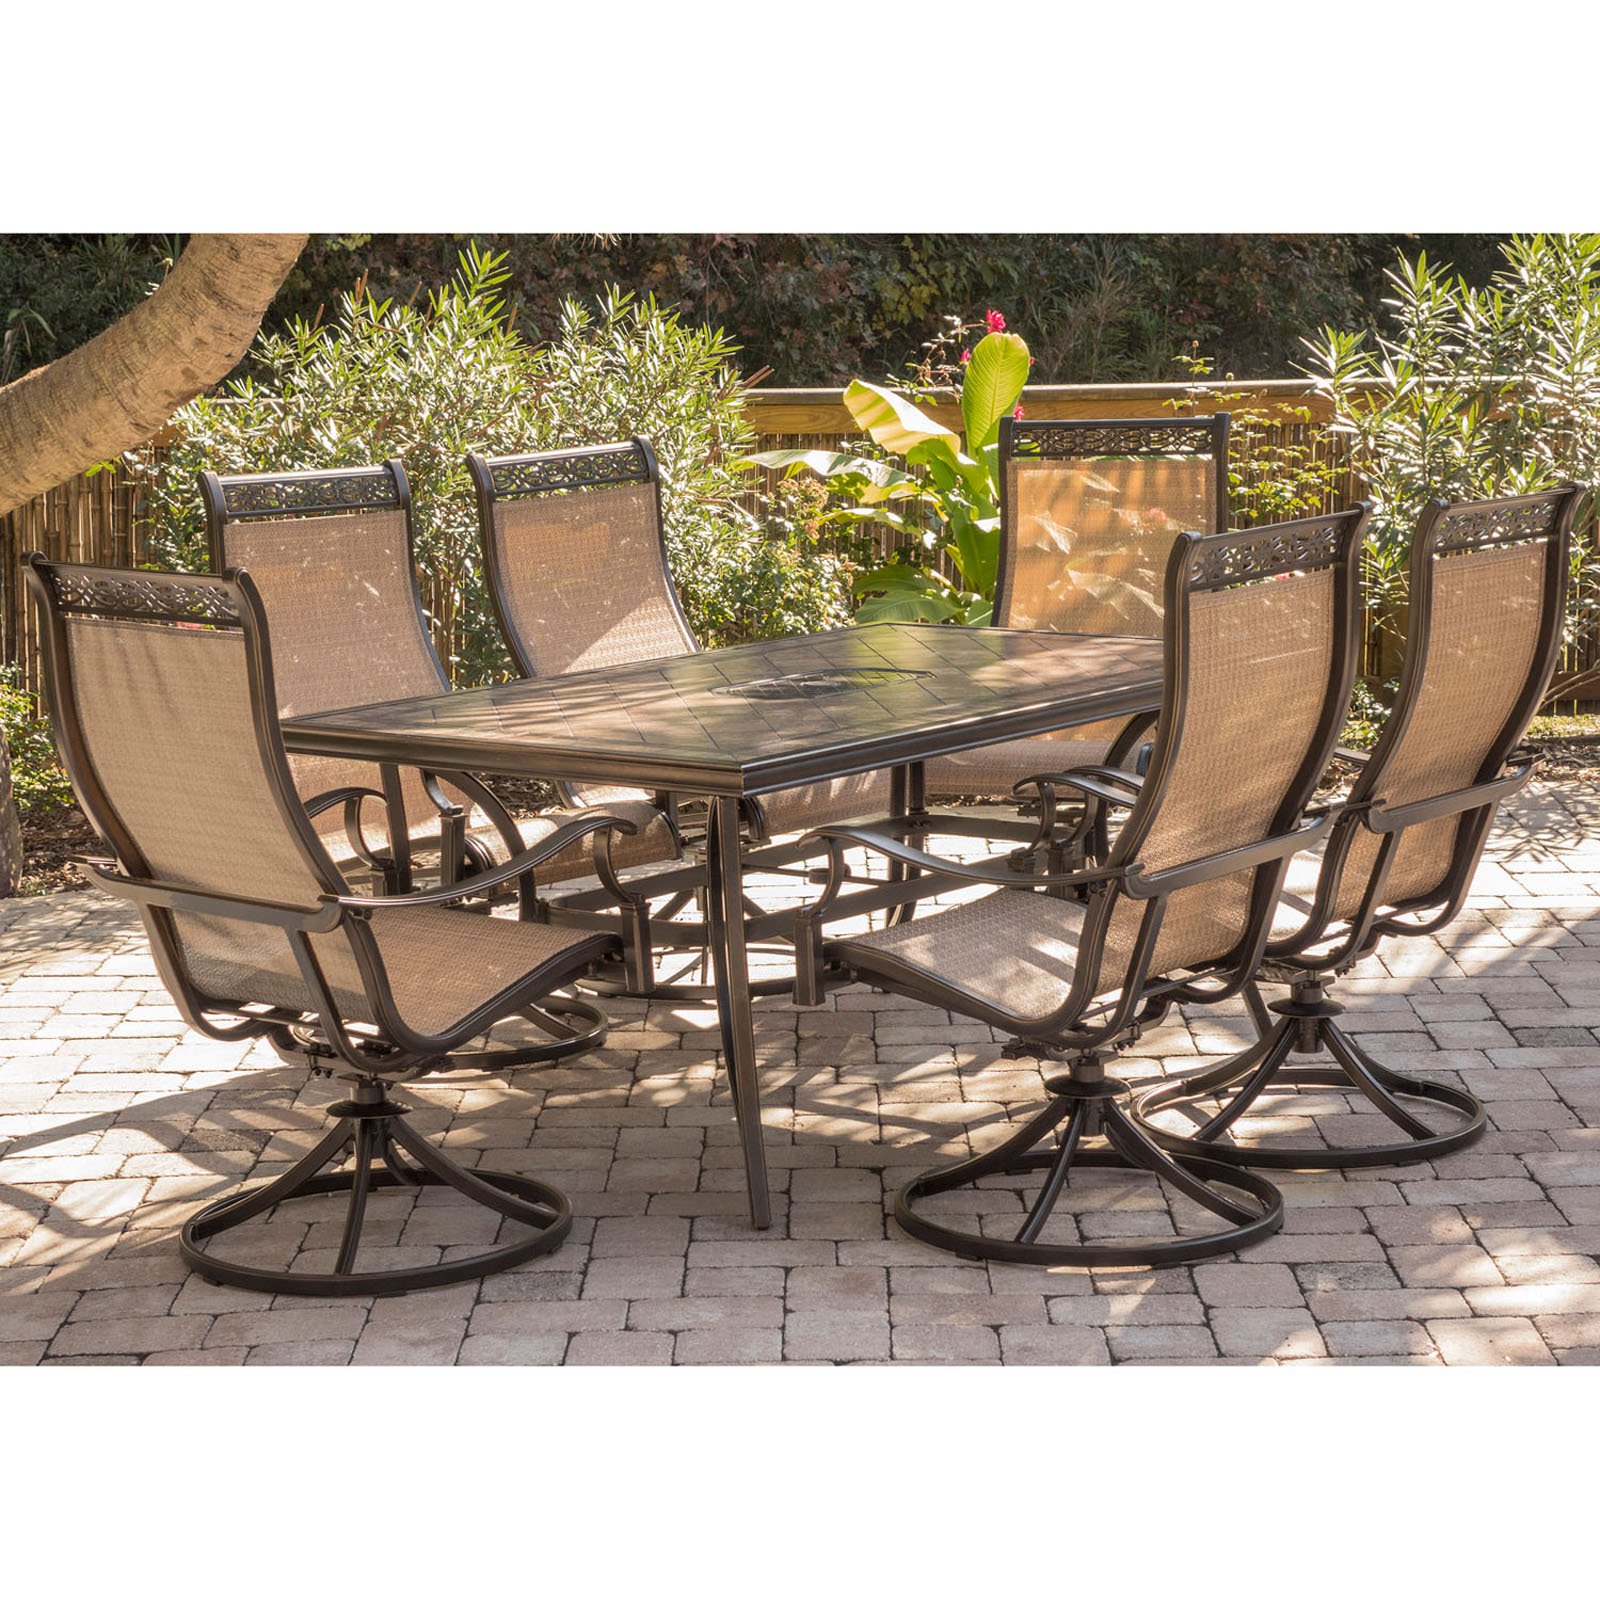 Hanover Outdoor Monaco 7-Piece Tile-Top Dining Set with Sling Chairs and Umbrella with Stand, Cedar - image 5 of 12